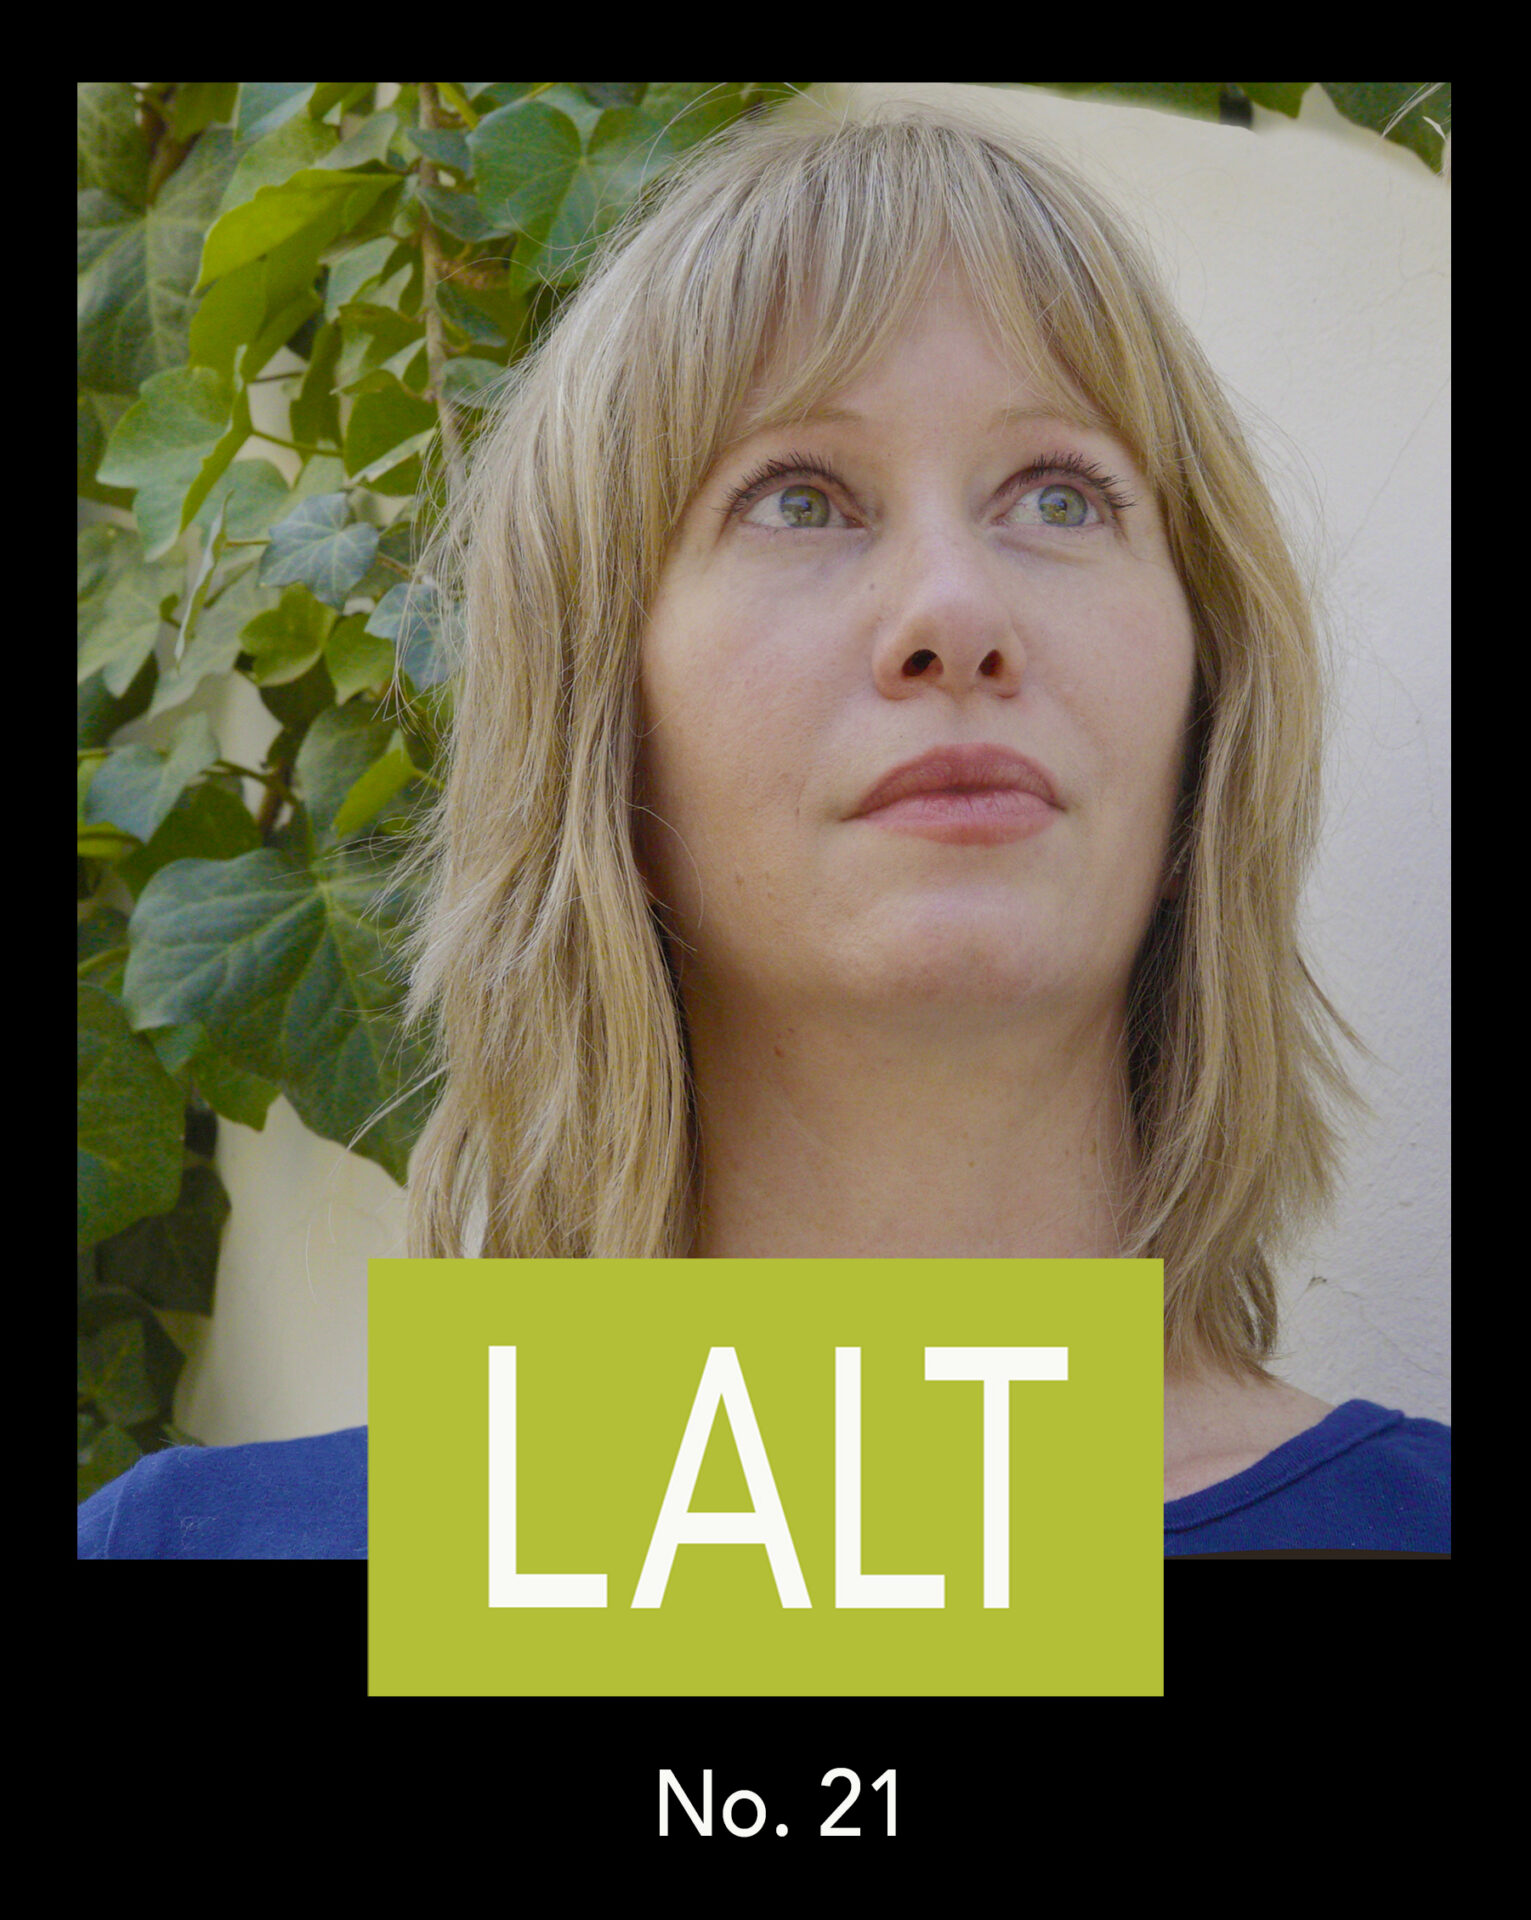 Issue 21 - LALT